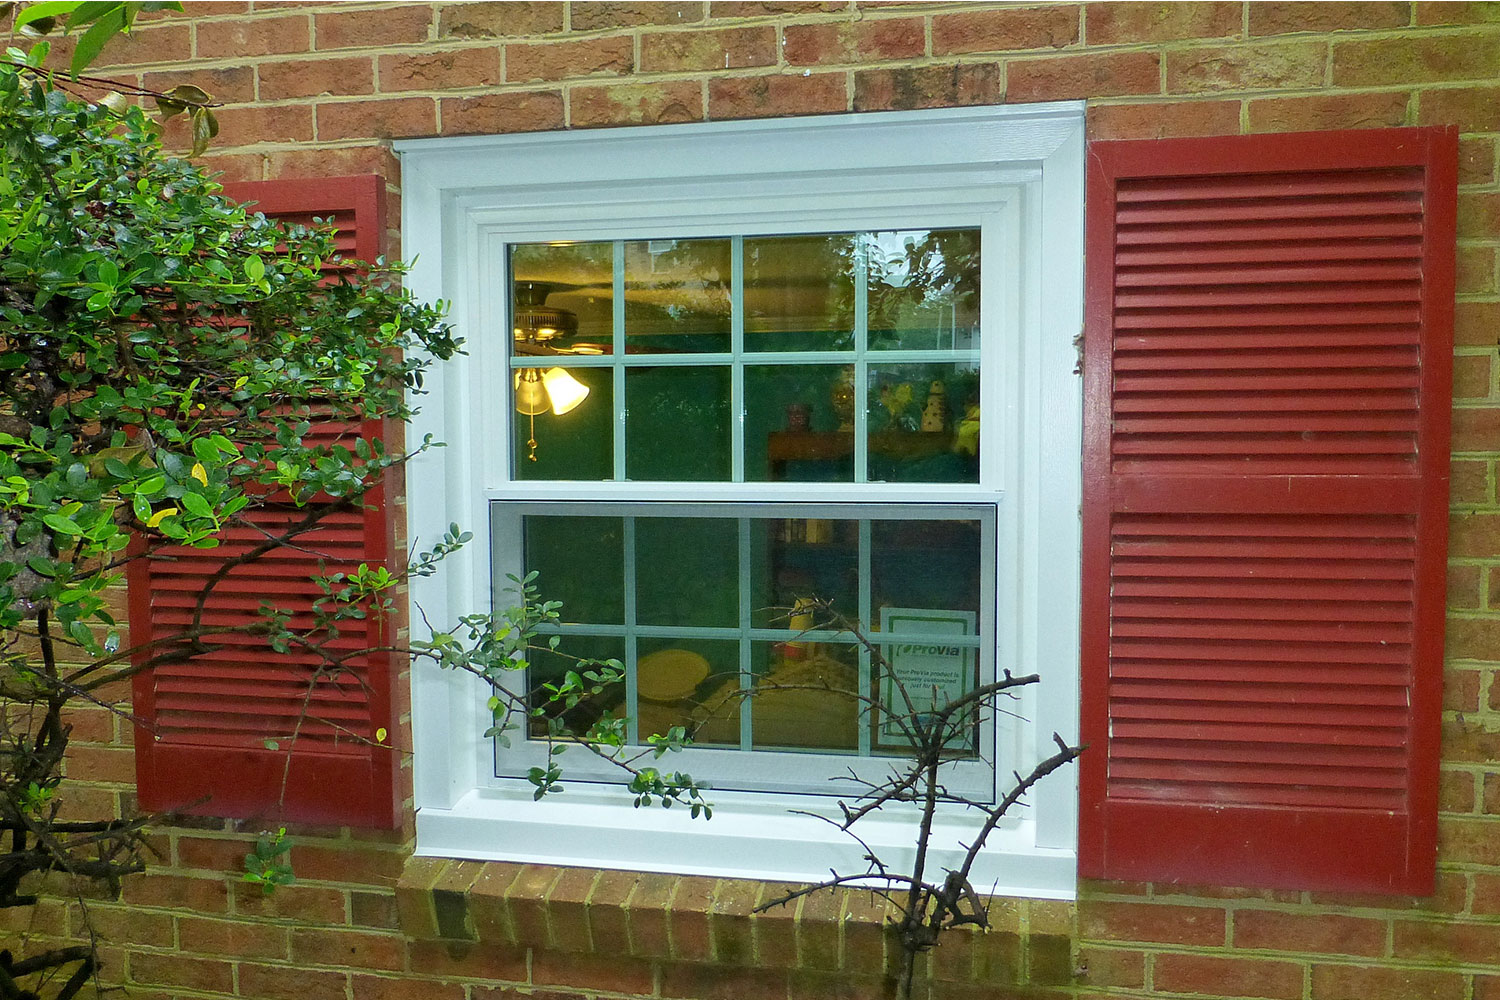 A tree in front of a white, square window with red sides